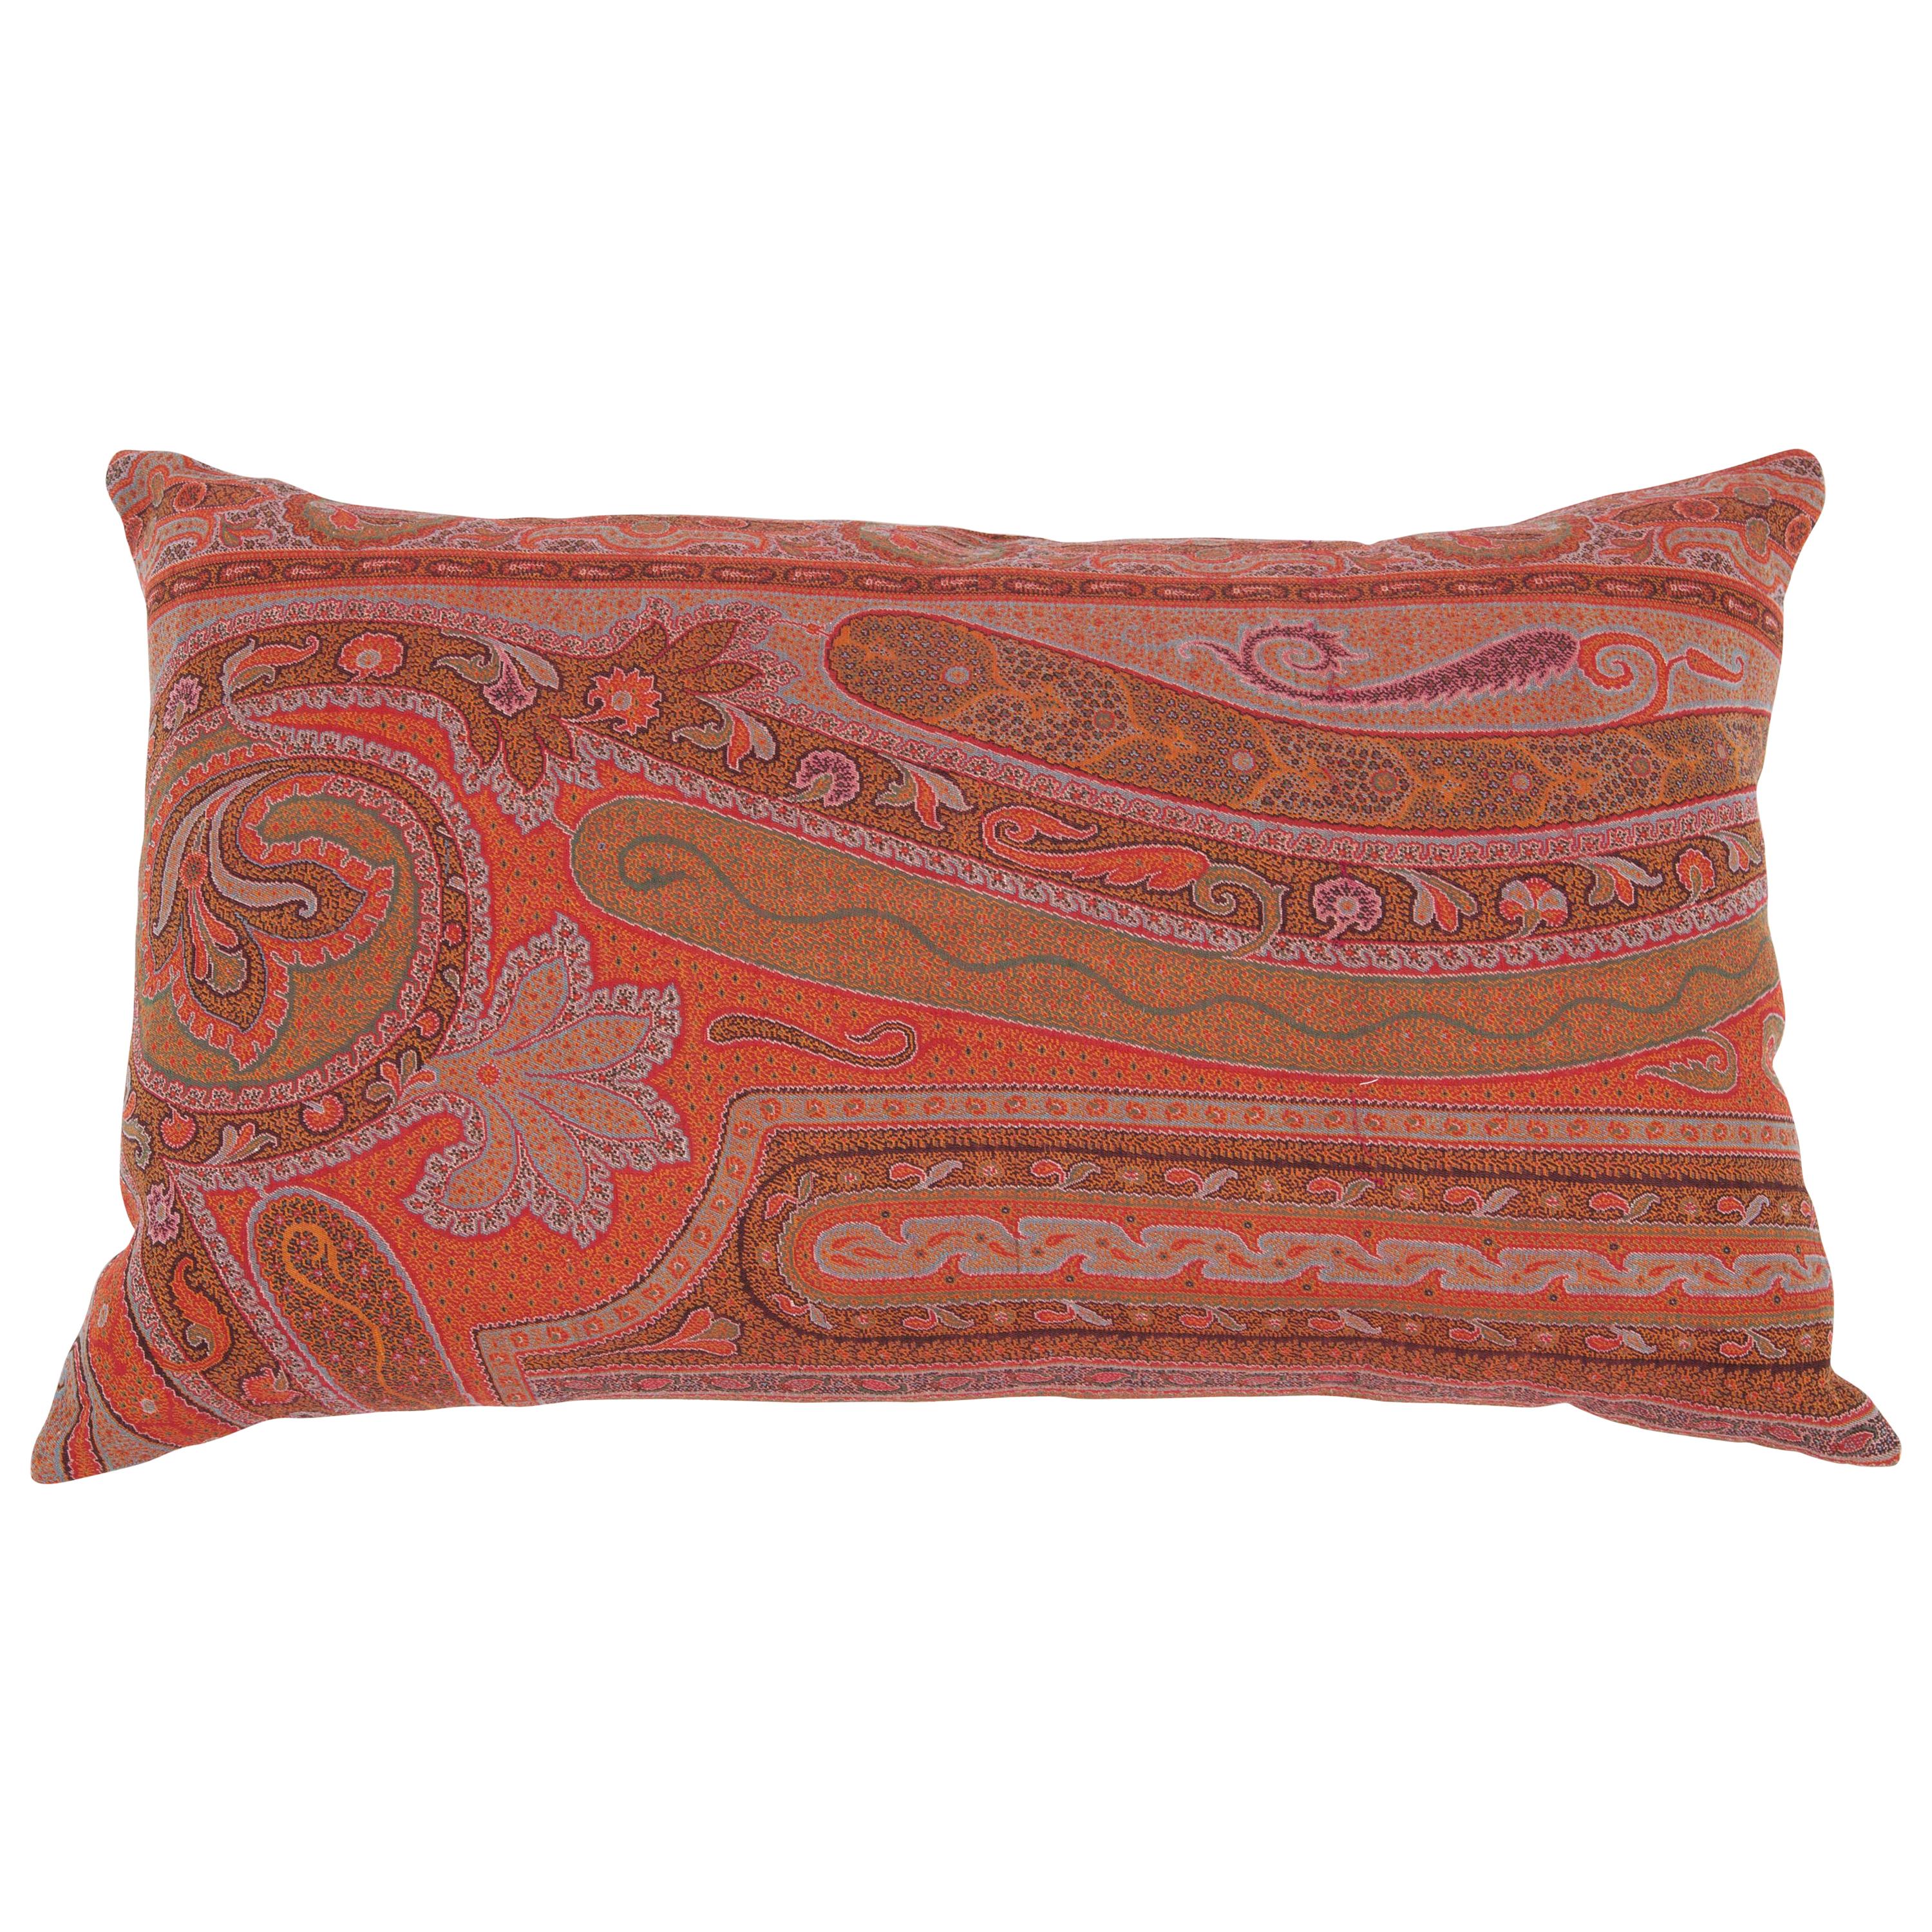 Early 19th Century European Paisley Wool Pillow